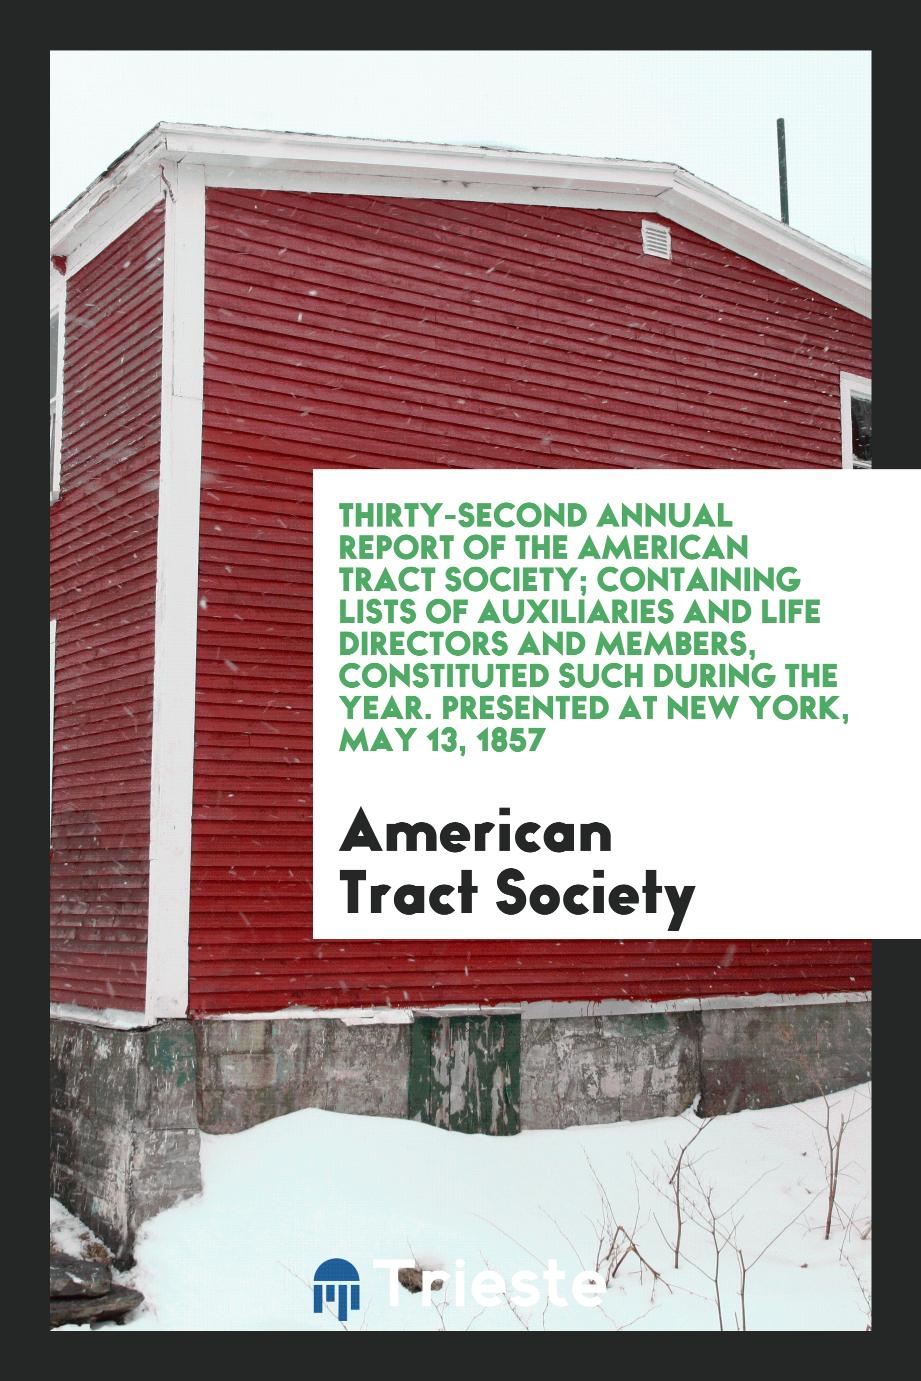 Thirty-Second Annual Report of the American Tract Society; Containing Lists of Auxiliaries and Life Directors and Members, Constituted Such During the Year. Presented at New York, May 13, 1857